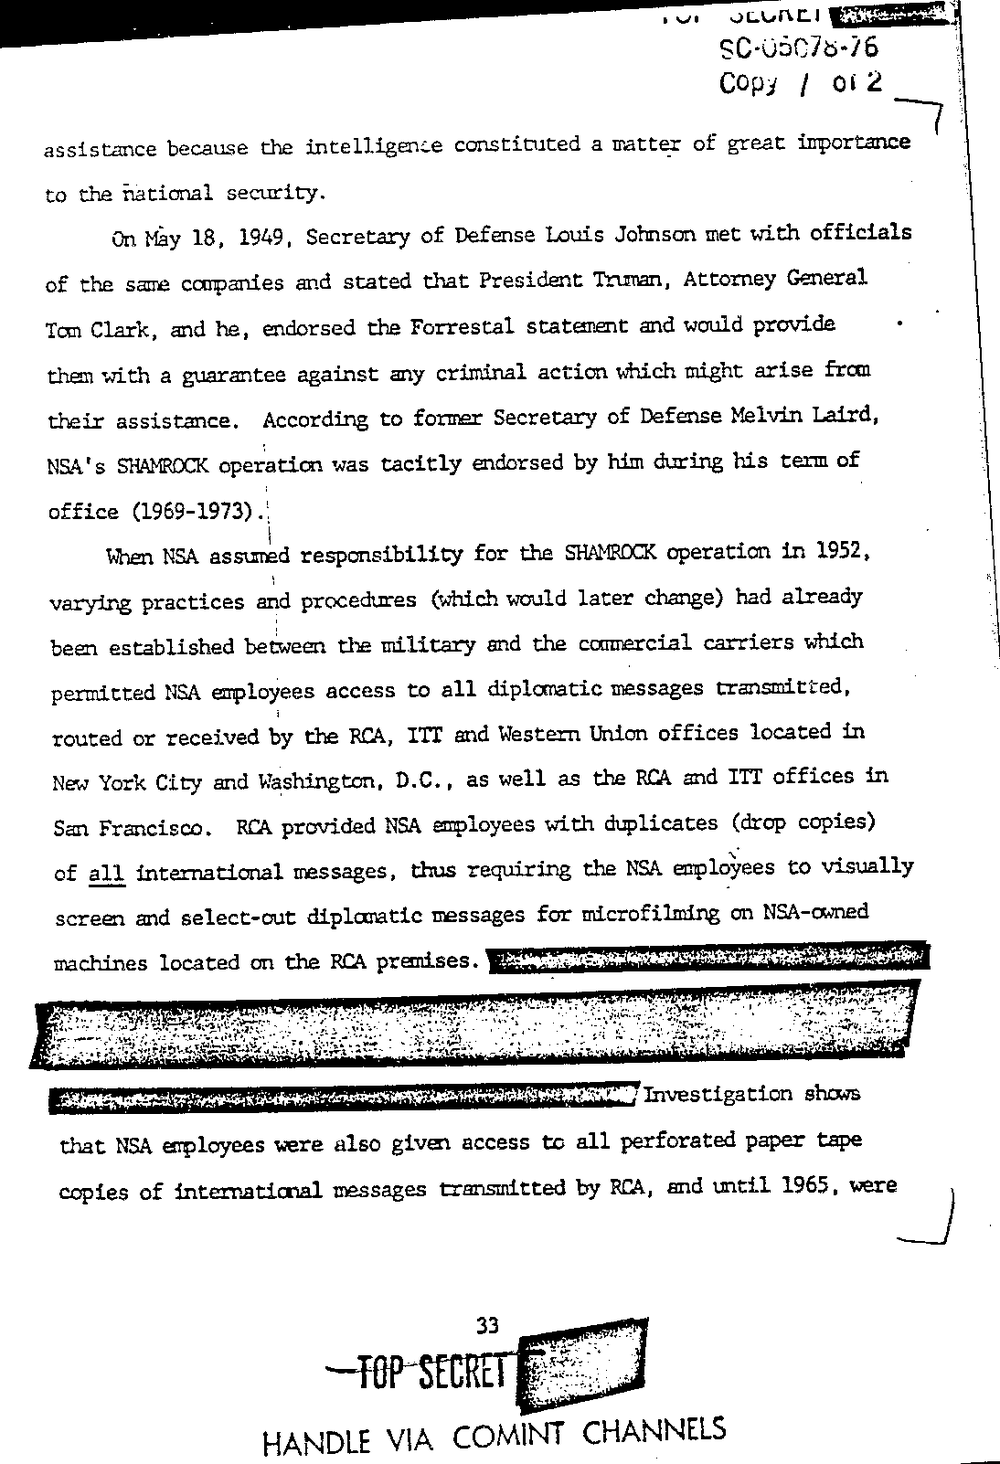 Page 41 from Report on Inquiry Into CIA Related Electronic Surveillance Activities